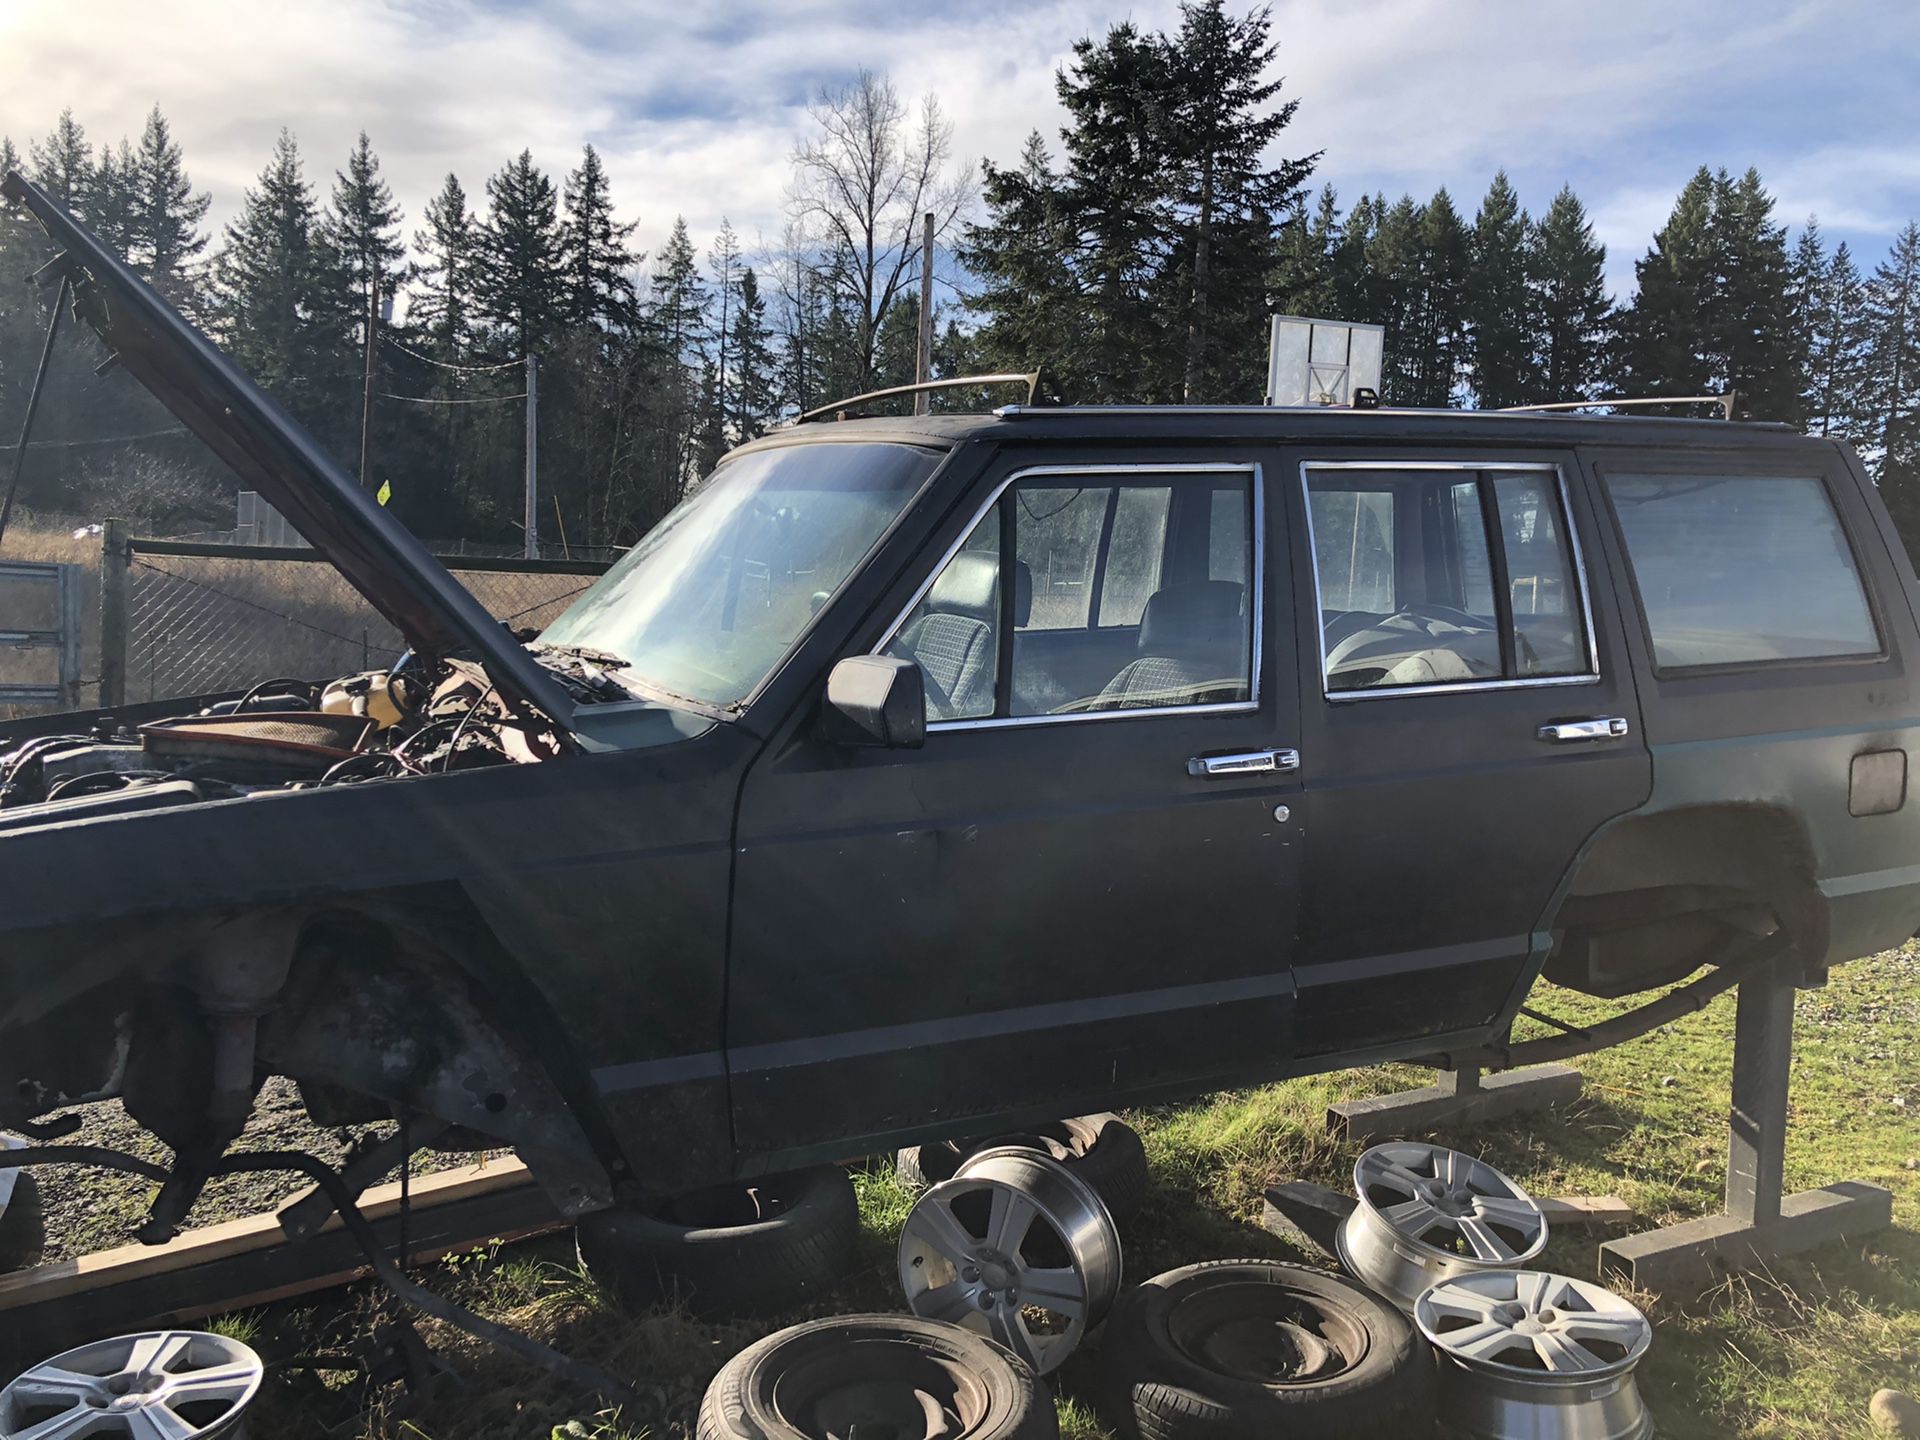 89 Cherokee Jeep for parts or whole. Have title